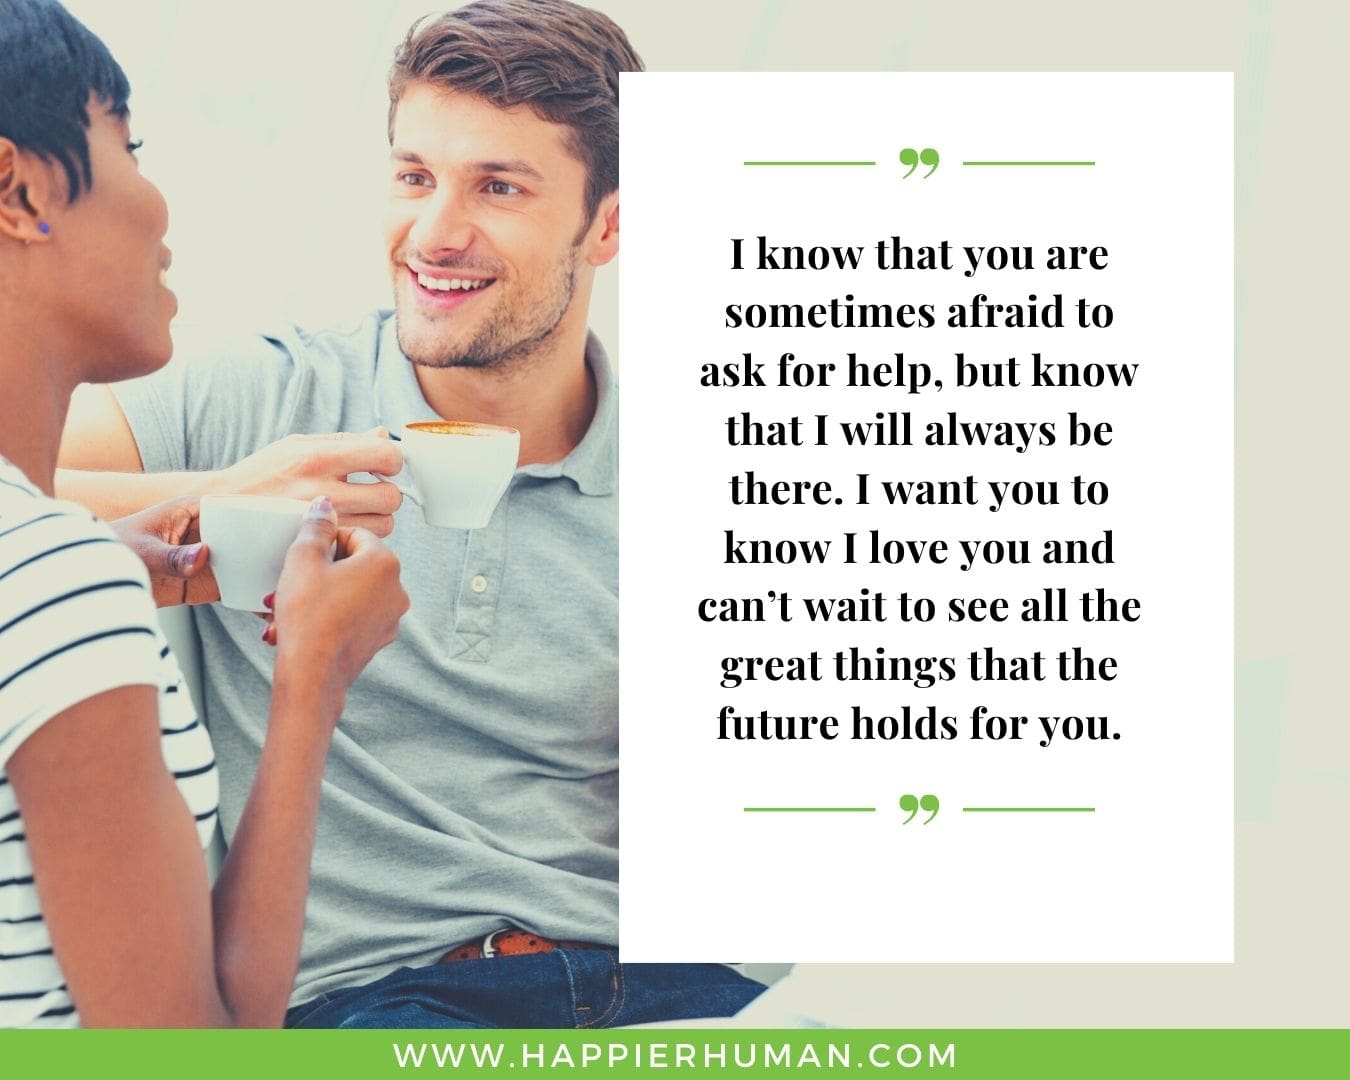 55 I'm Here for You Quotes to Say to a Loved One - Happier Human